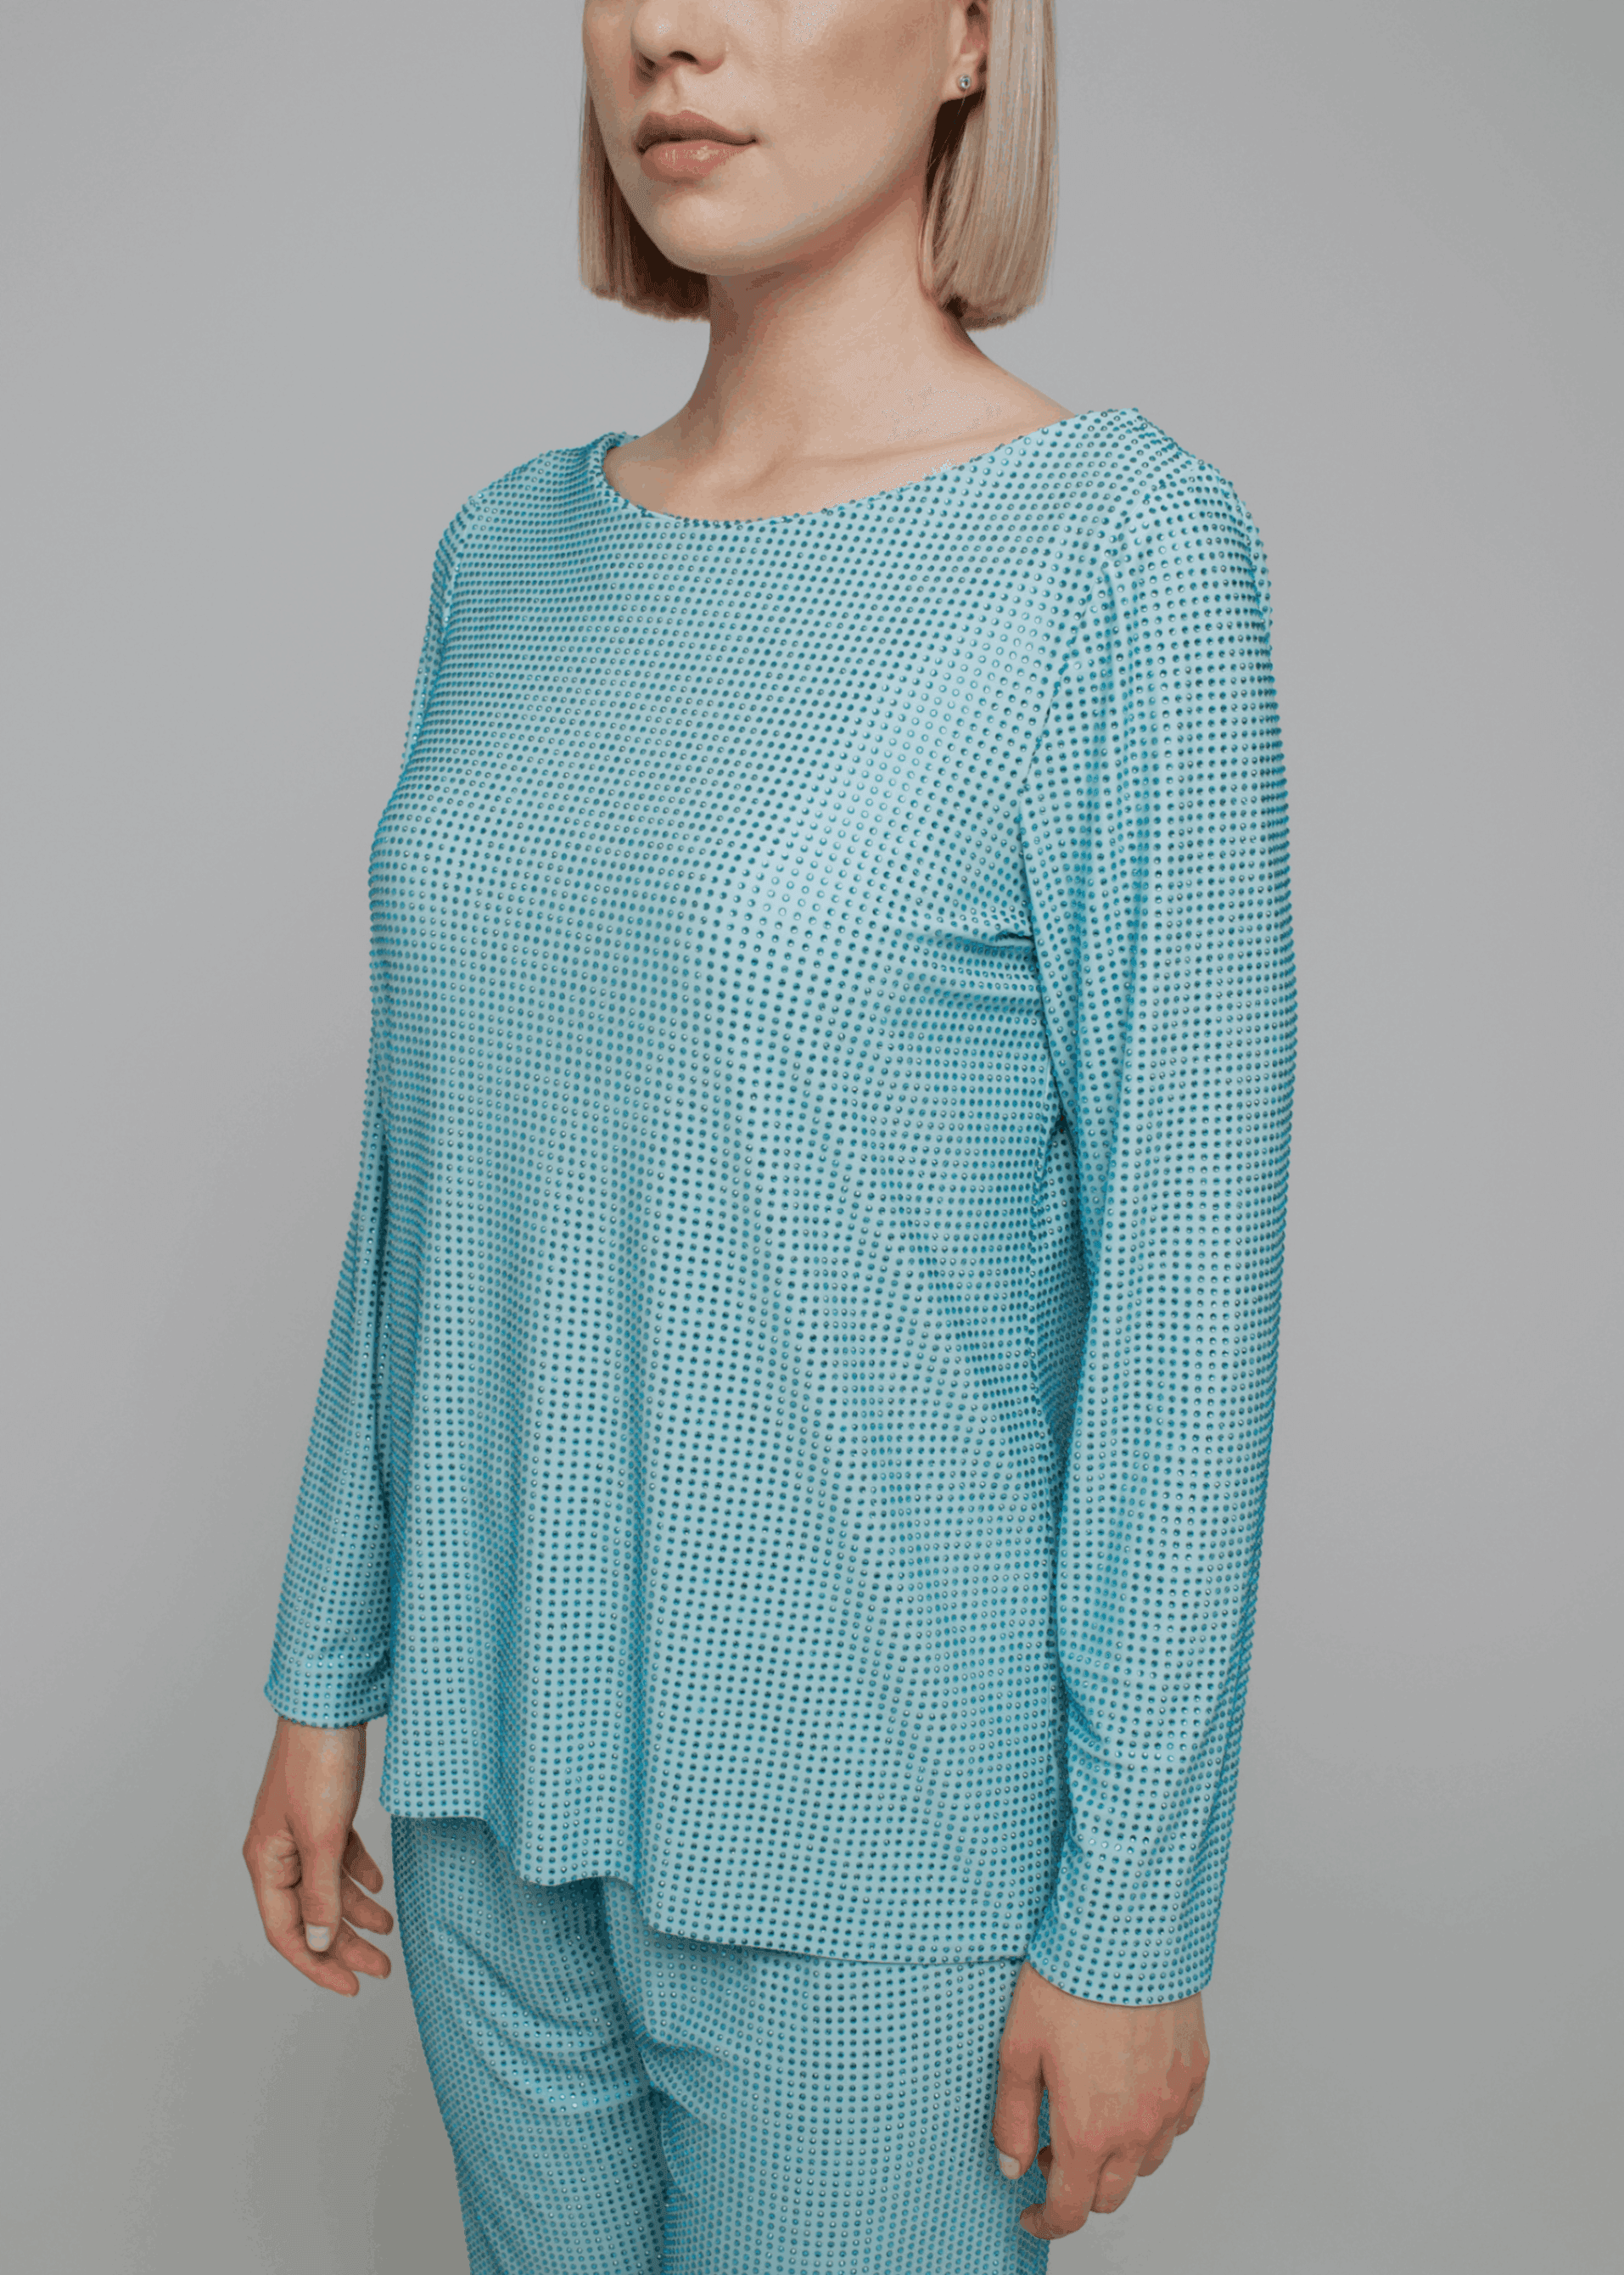 Exquisite detail of Crystal Long Sleeve Tunica Top showcasing the fine craftsmanship and elegant design characteristic of Axinia Collection 's luxury collection.